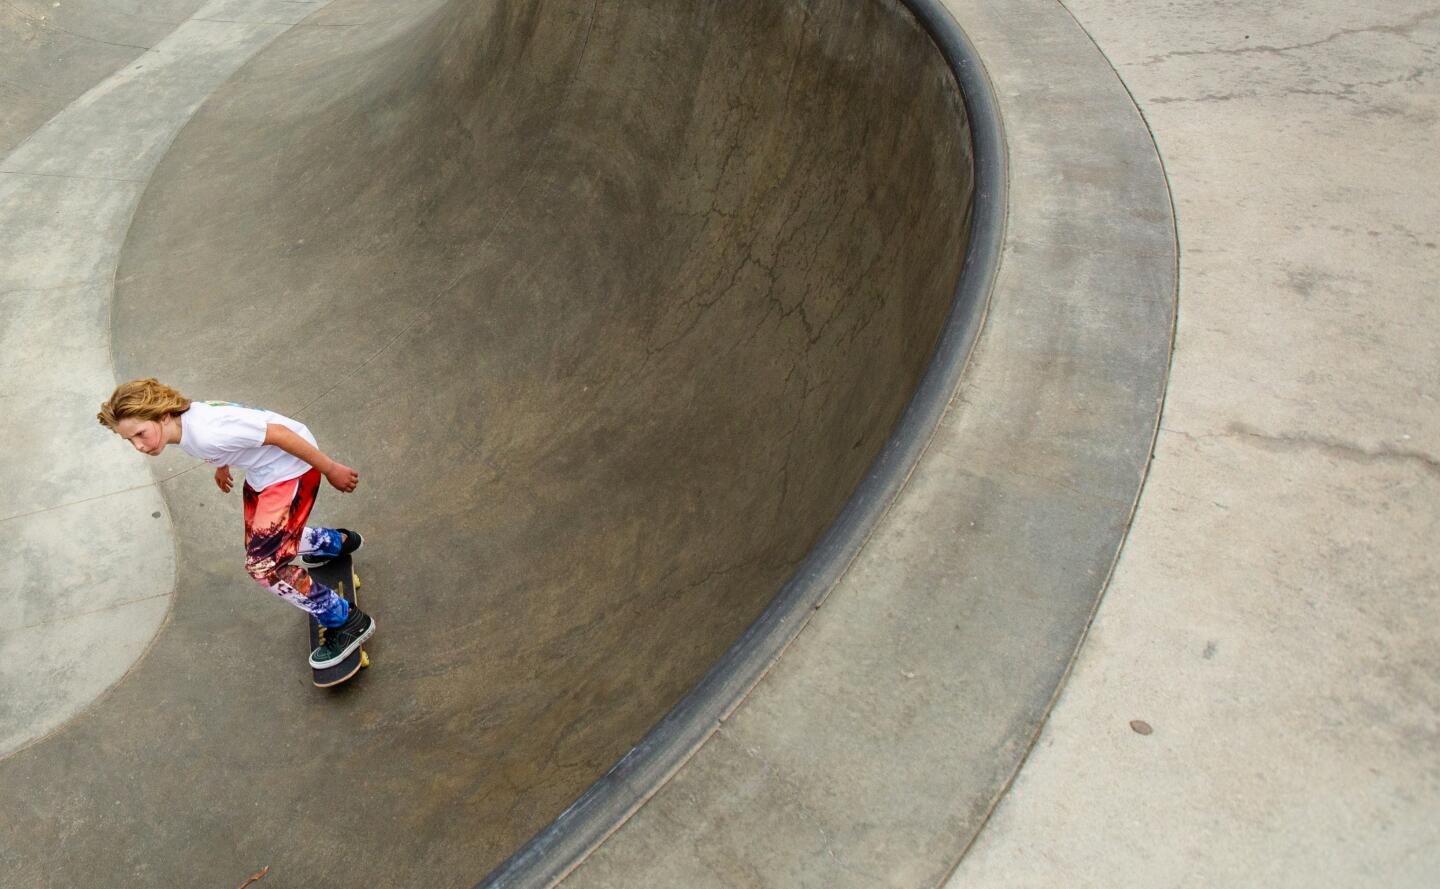 While on vacation with his family Liam Bengtsson, 12, of Fort Worth was at Venice Skate Park on Monday in Venice.